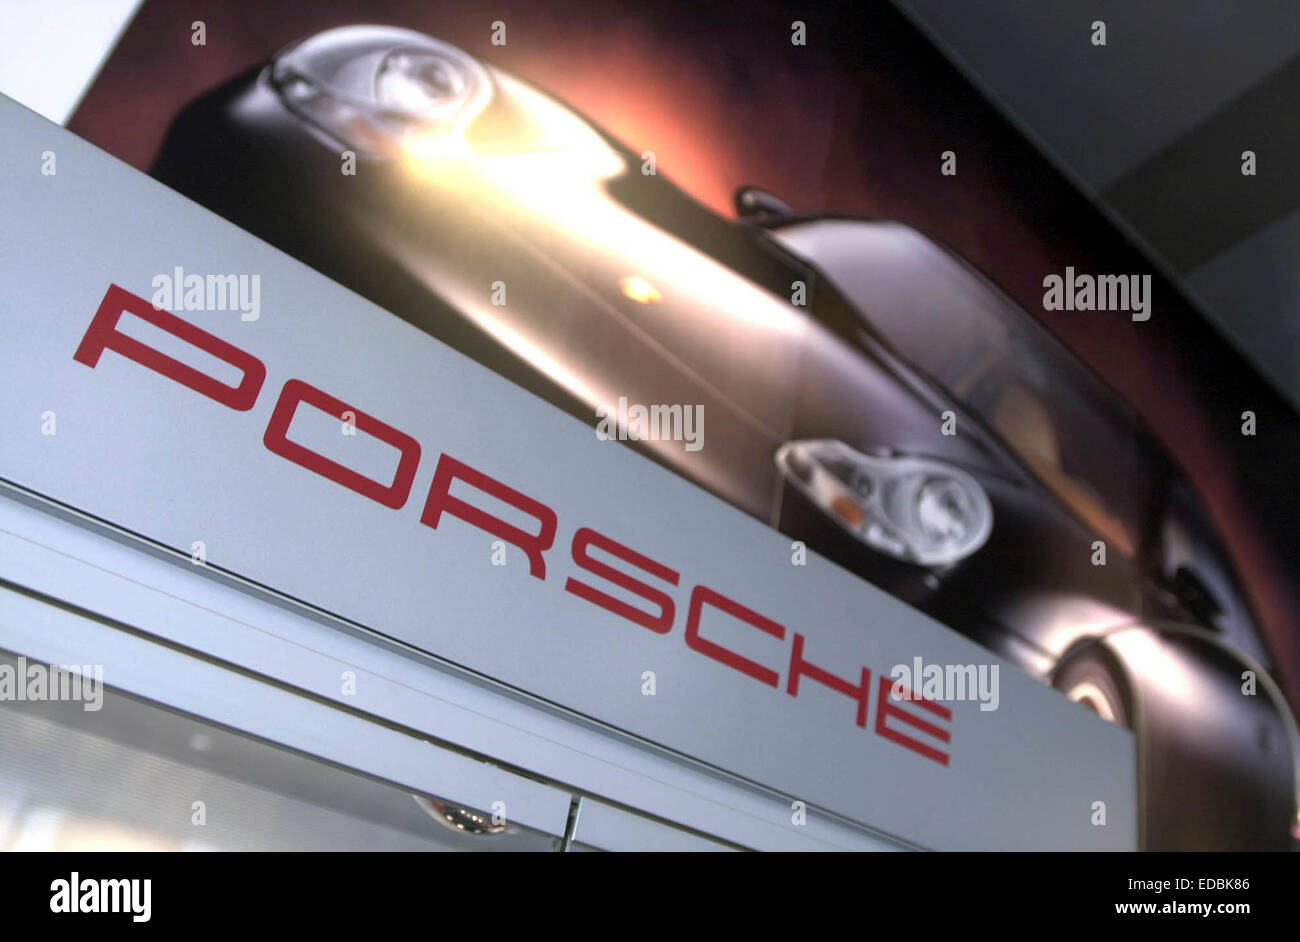 Picture shows a poster and Porche branding. Stock Photo